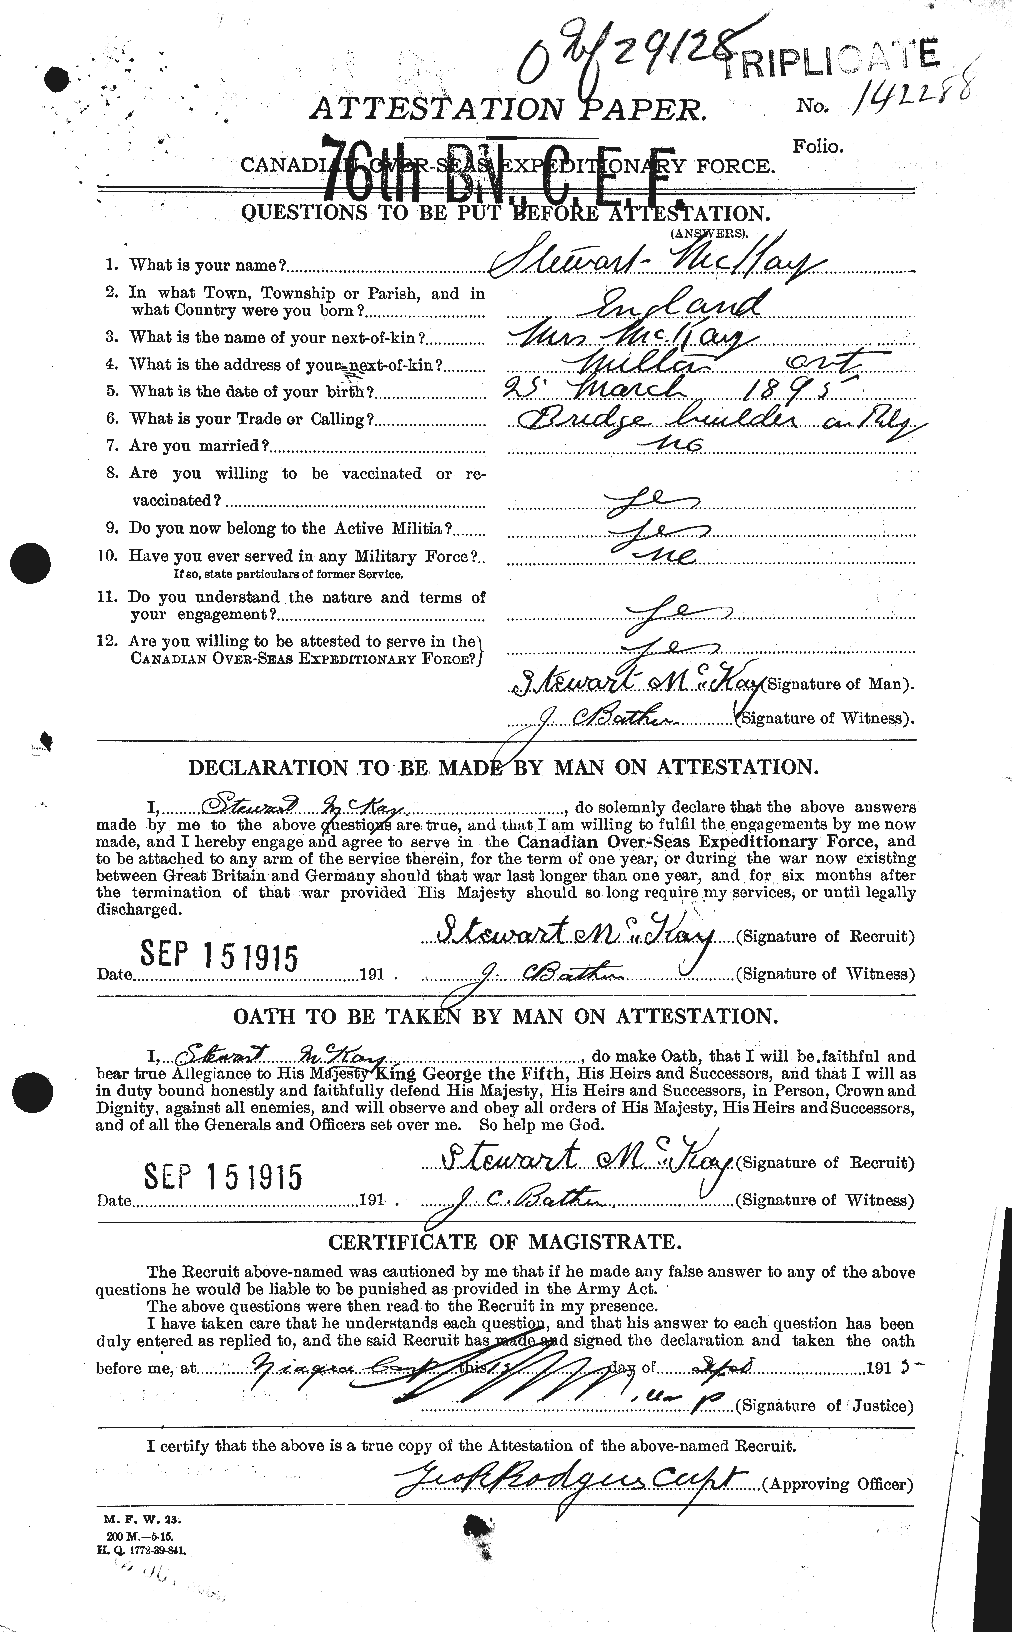 Personnel Records of the First World War - CEF 530147a